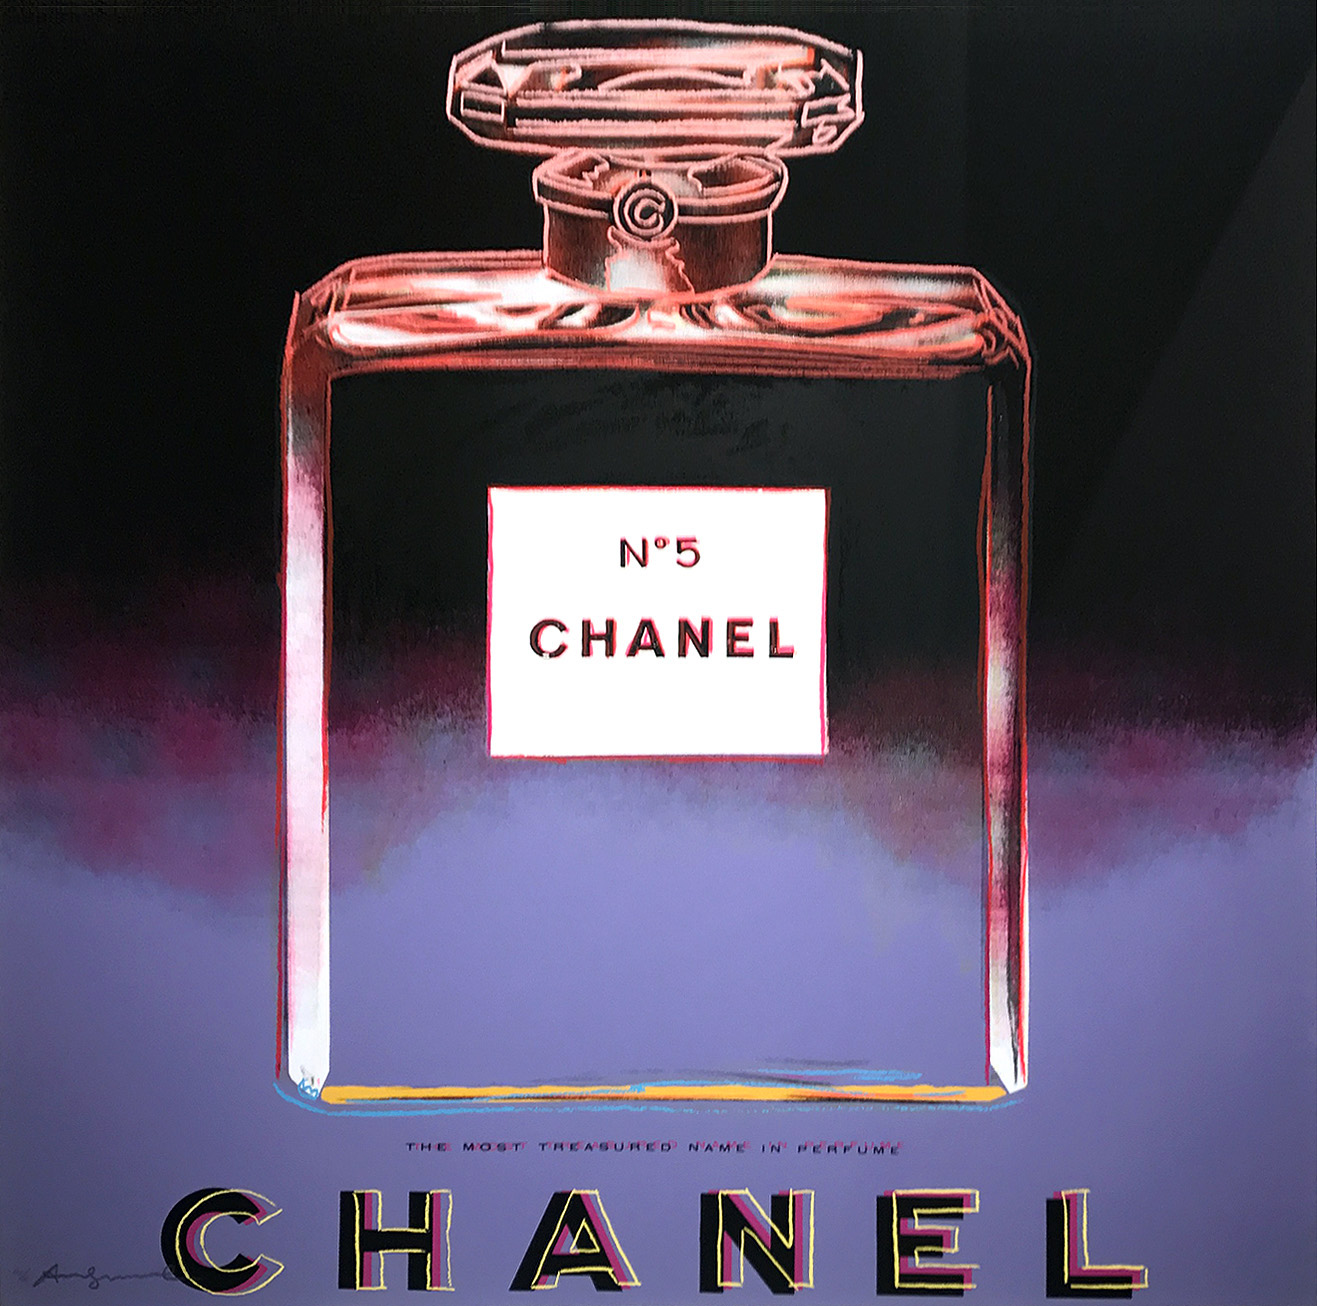 Andy Warhol, Chanel No. 5 from Ads Series 1985